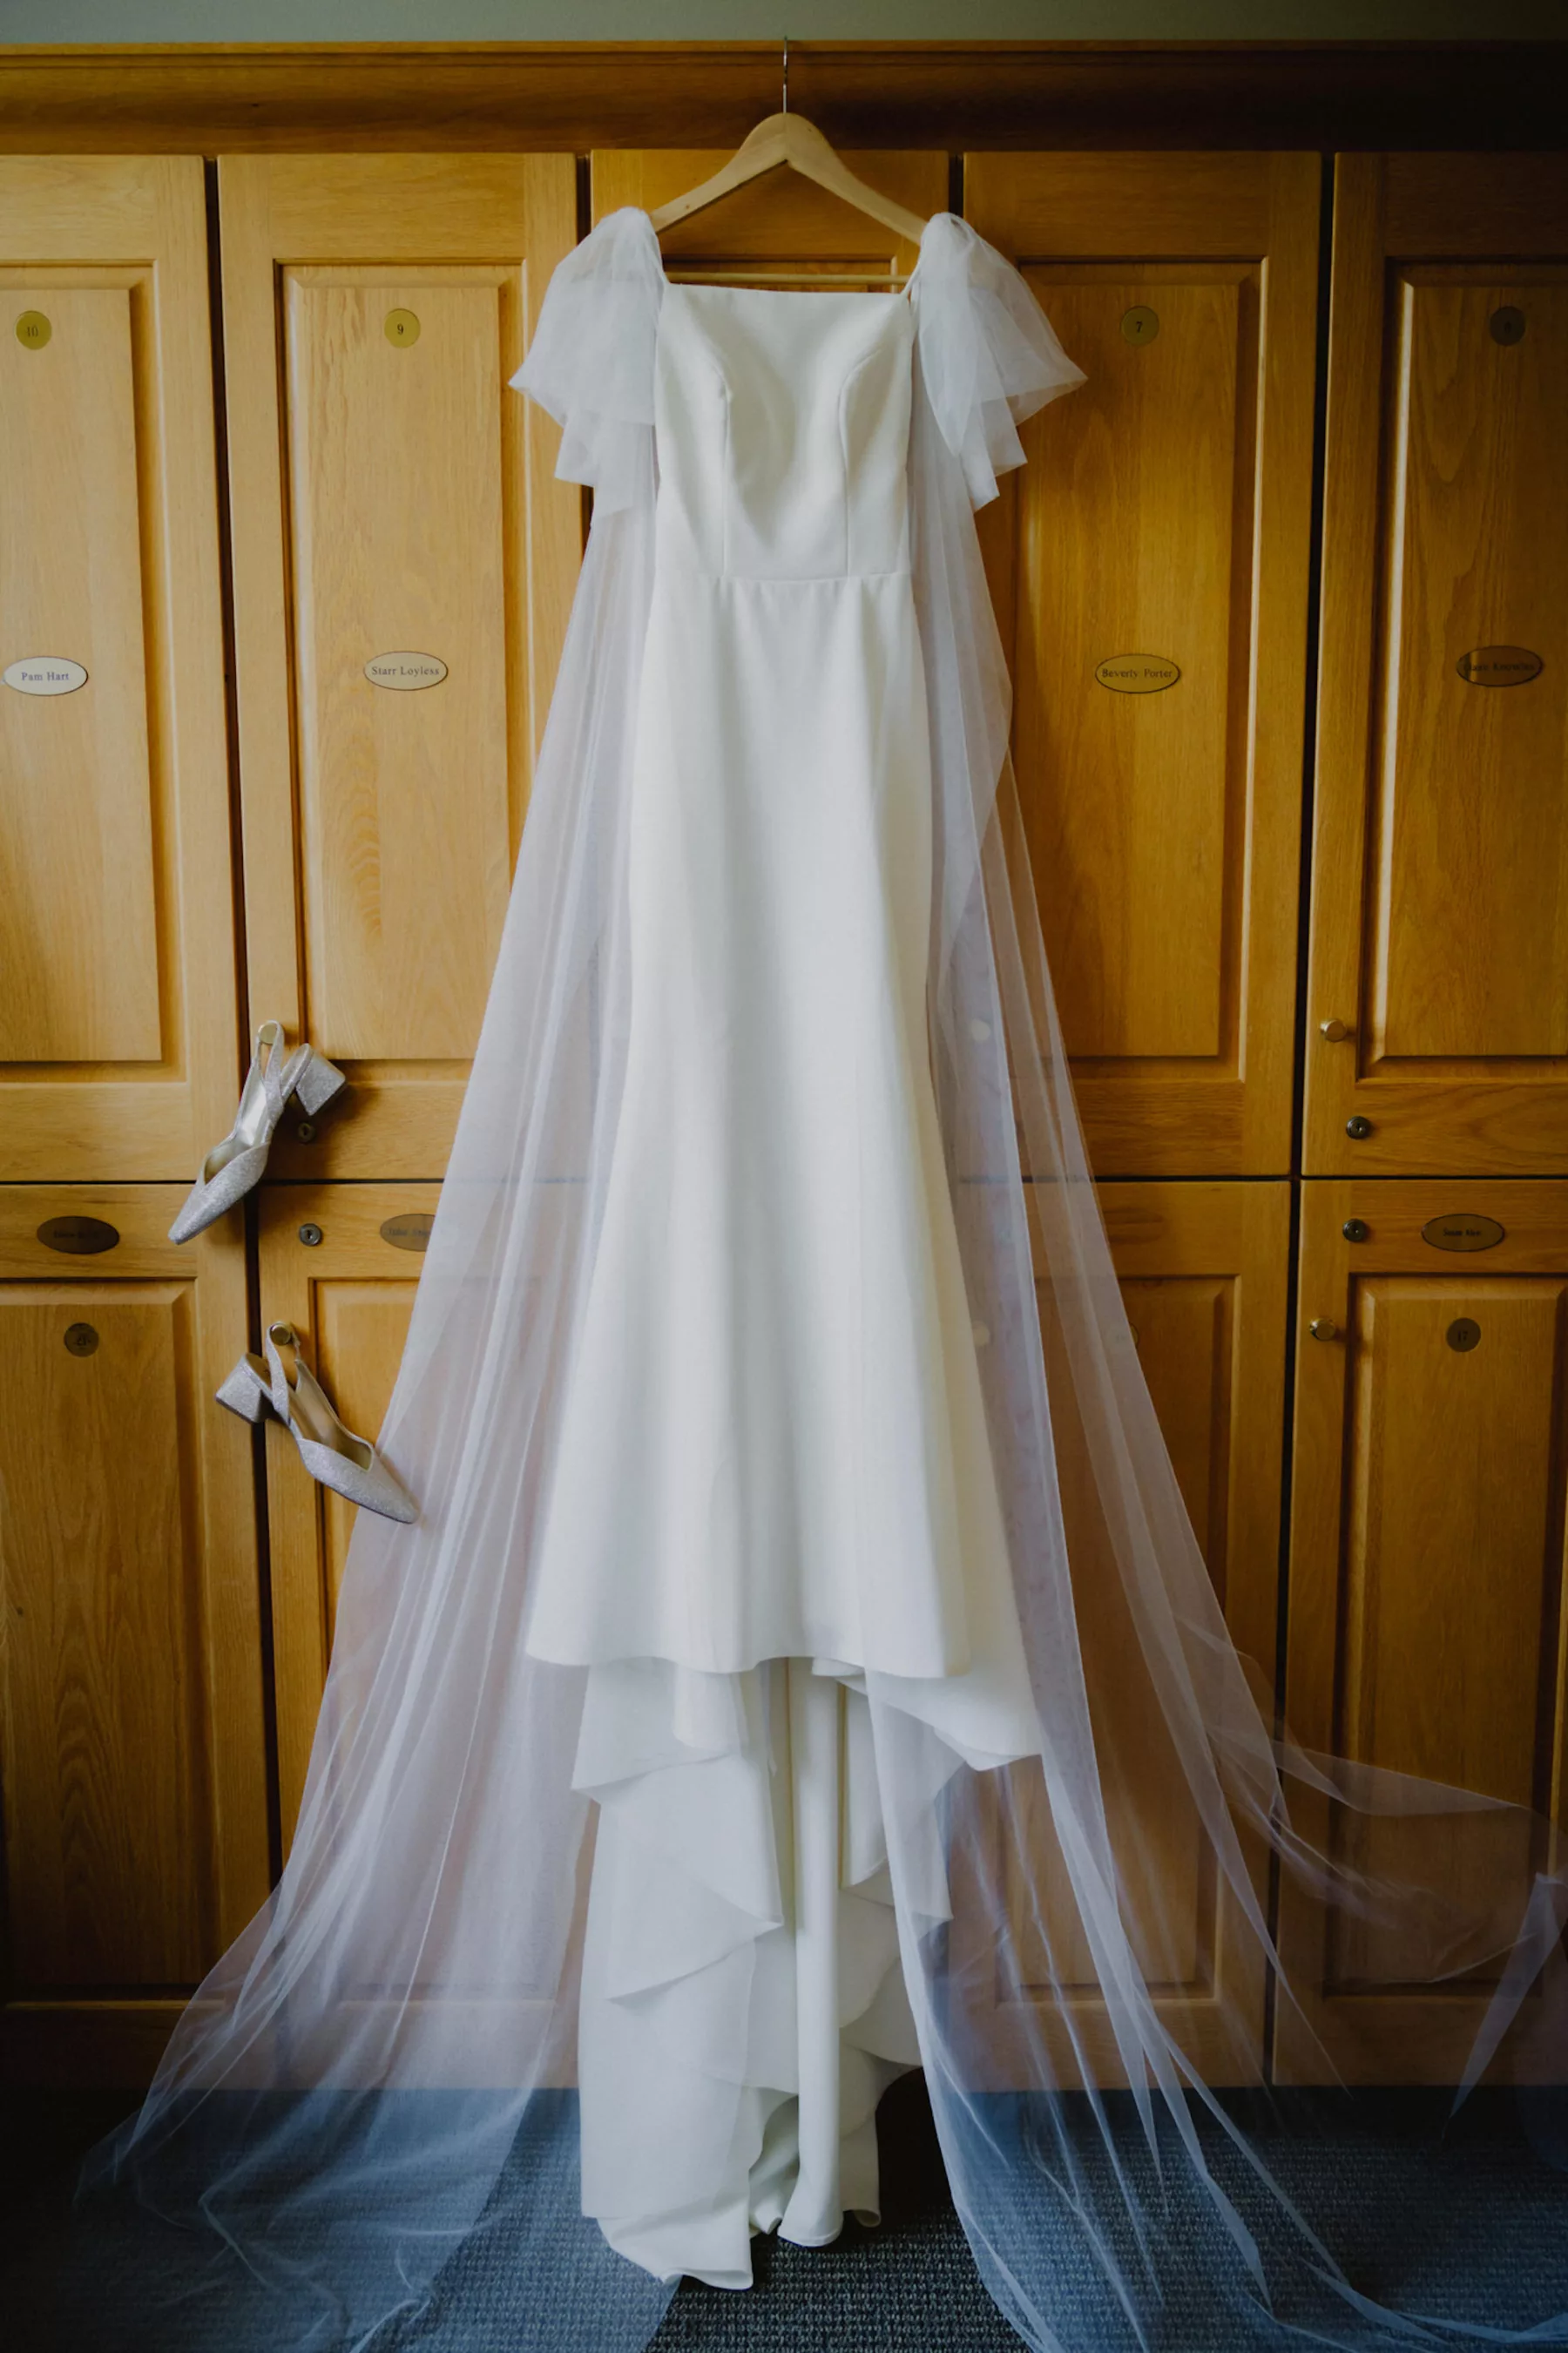 Classic White Satin Fit and Flare Justin Alexander Wedding Dress with Tulle Cape Veil Inspiration